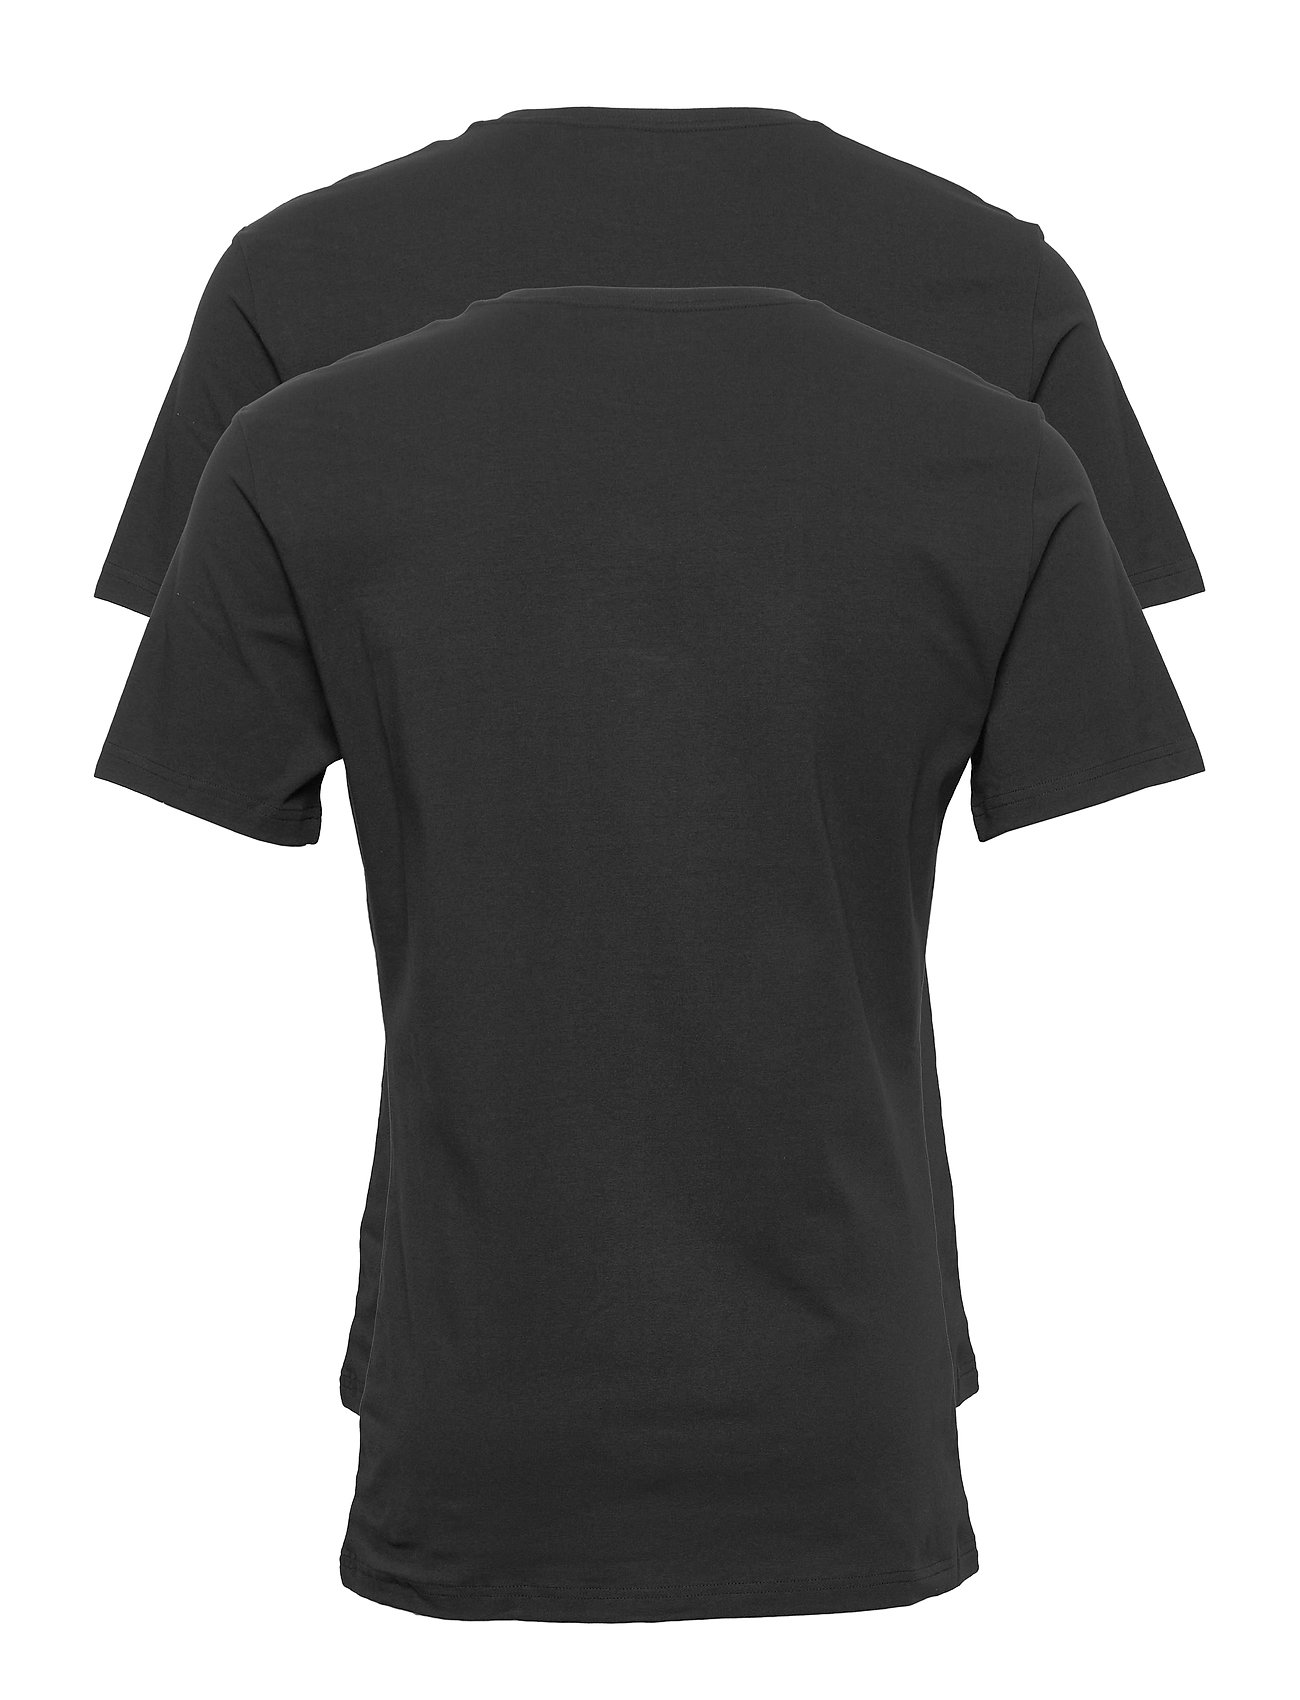 Bread & Boxers - 2-Pack Crew Neck - t-shirts - black - 1